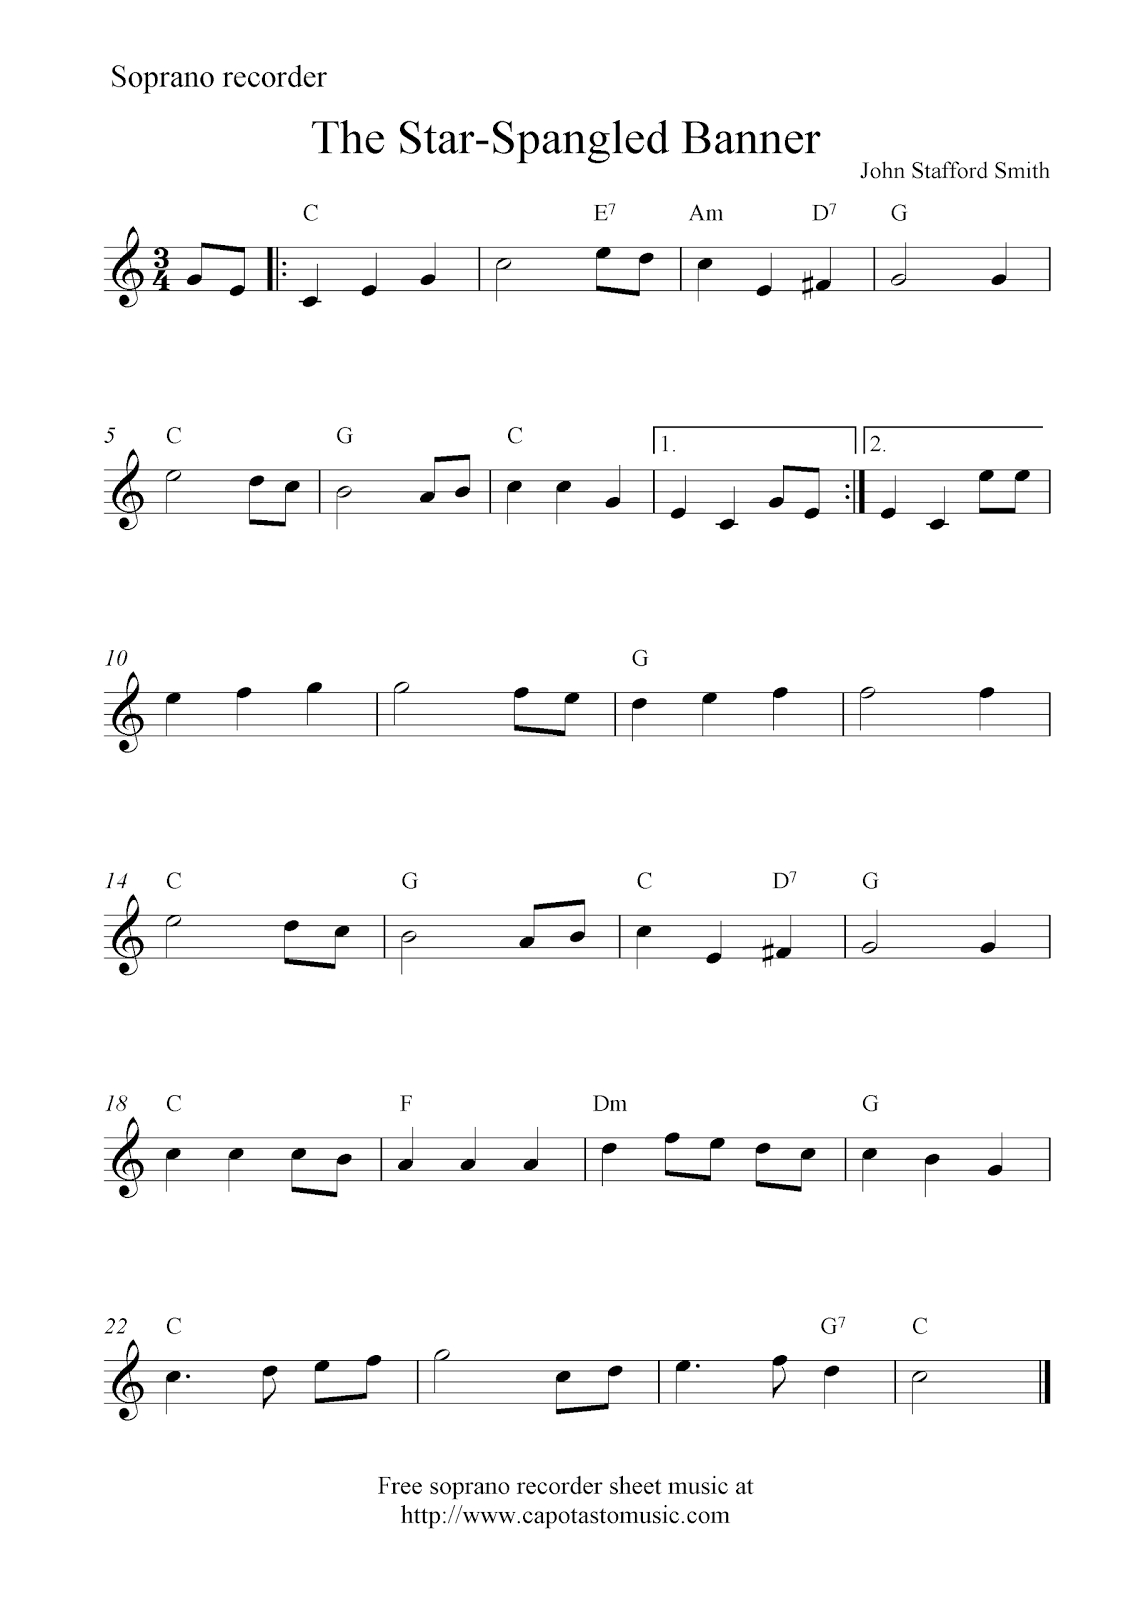 The Star-Spangled Banner, Free Soprano Recorder Sheet Music Notes - Free Printable Recorder Sheet Music For Beginners